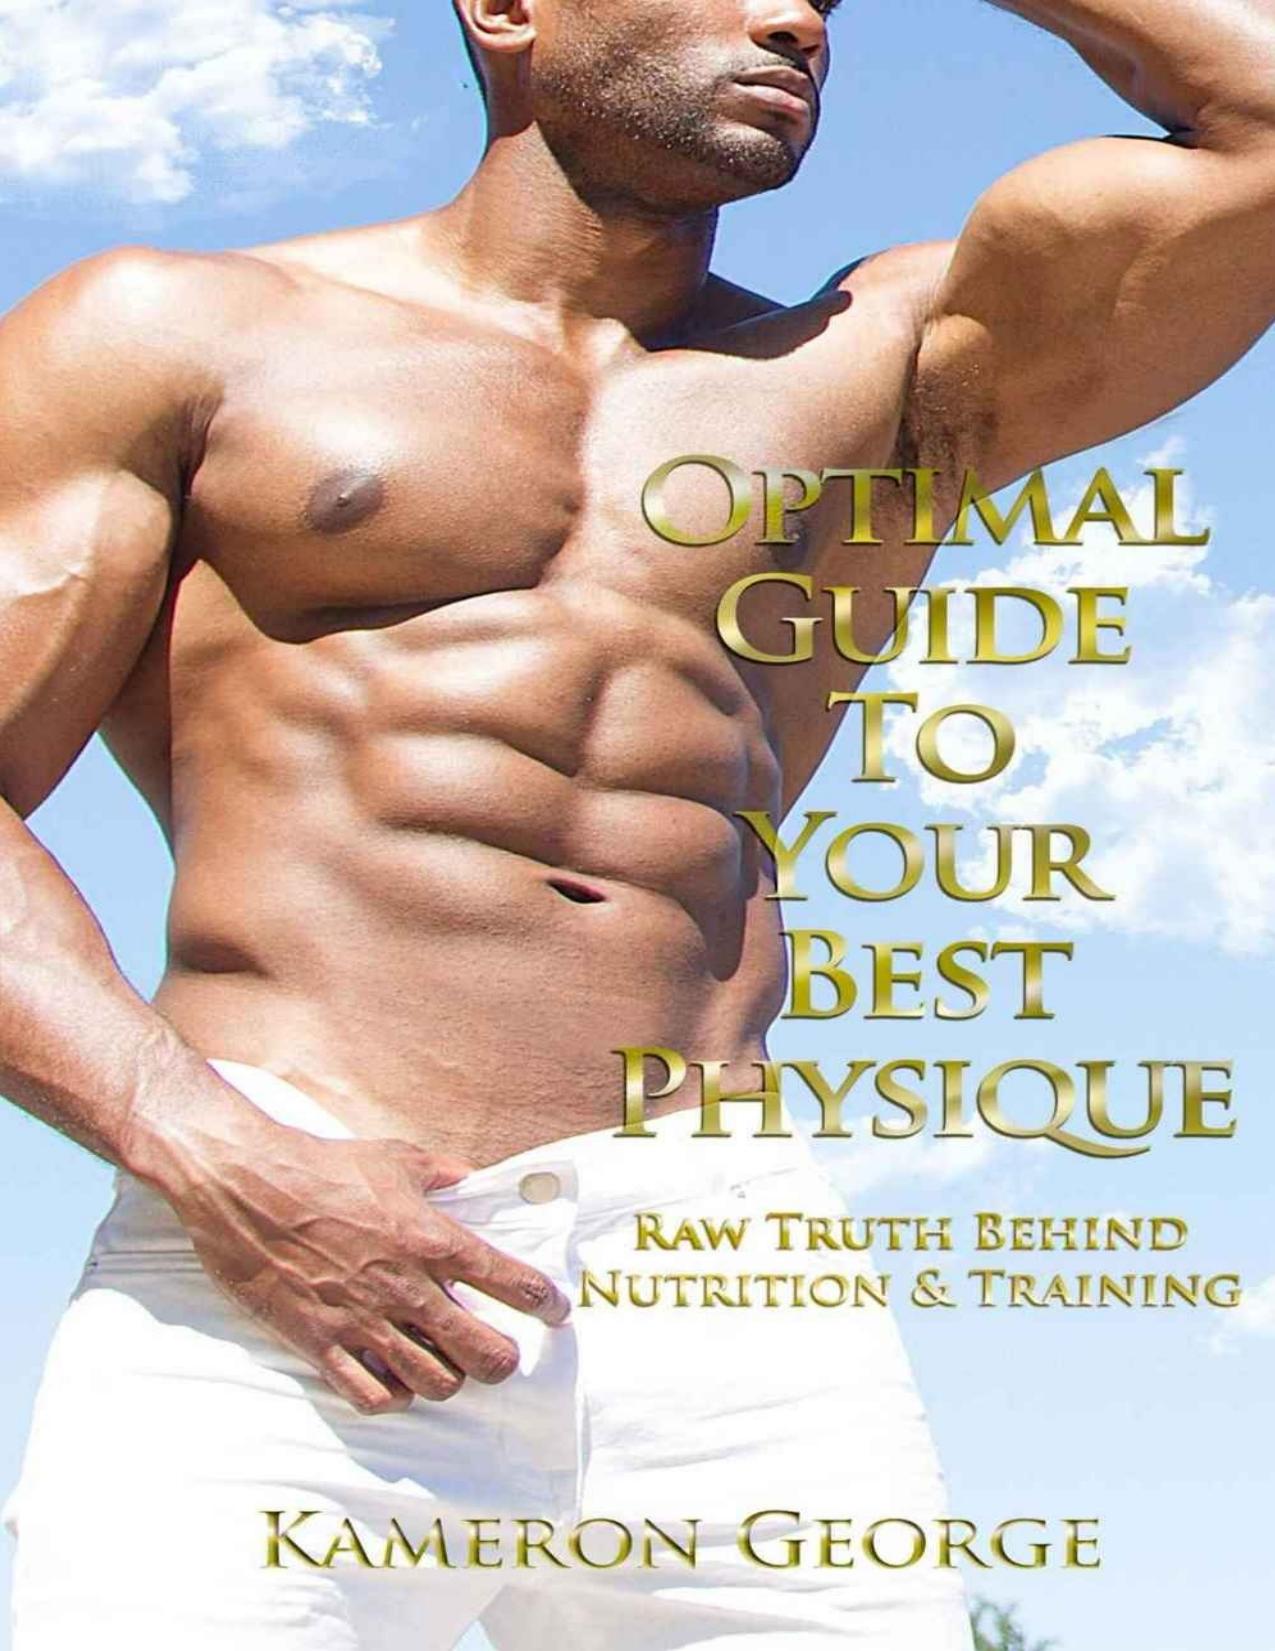 Nutrition Book, How to Gain Muscle, Weight Training, How to Lose Weight, Diet book, Protein Diet Optimal Guide To Your Best Physique: Raw Truth Behind Nutrition \& Training - PDFDrive.com